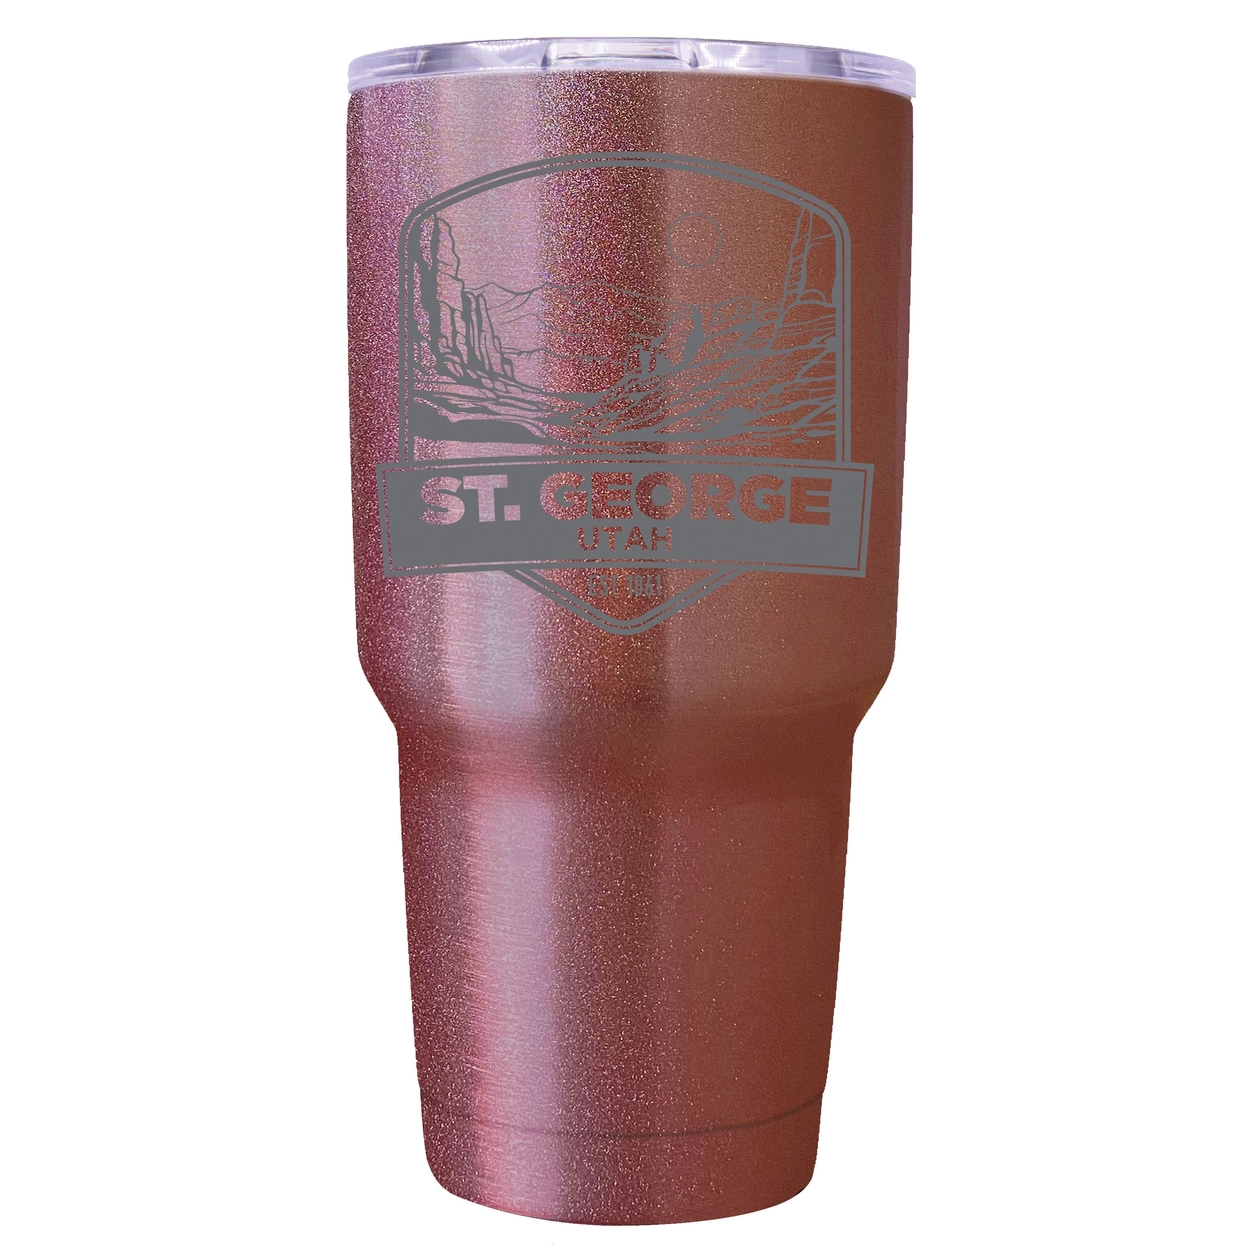 St. George Utah Souvenir 24 Oz Engraved Insulated Stainless Steel Tumbler - Coral,,Single Unit